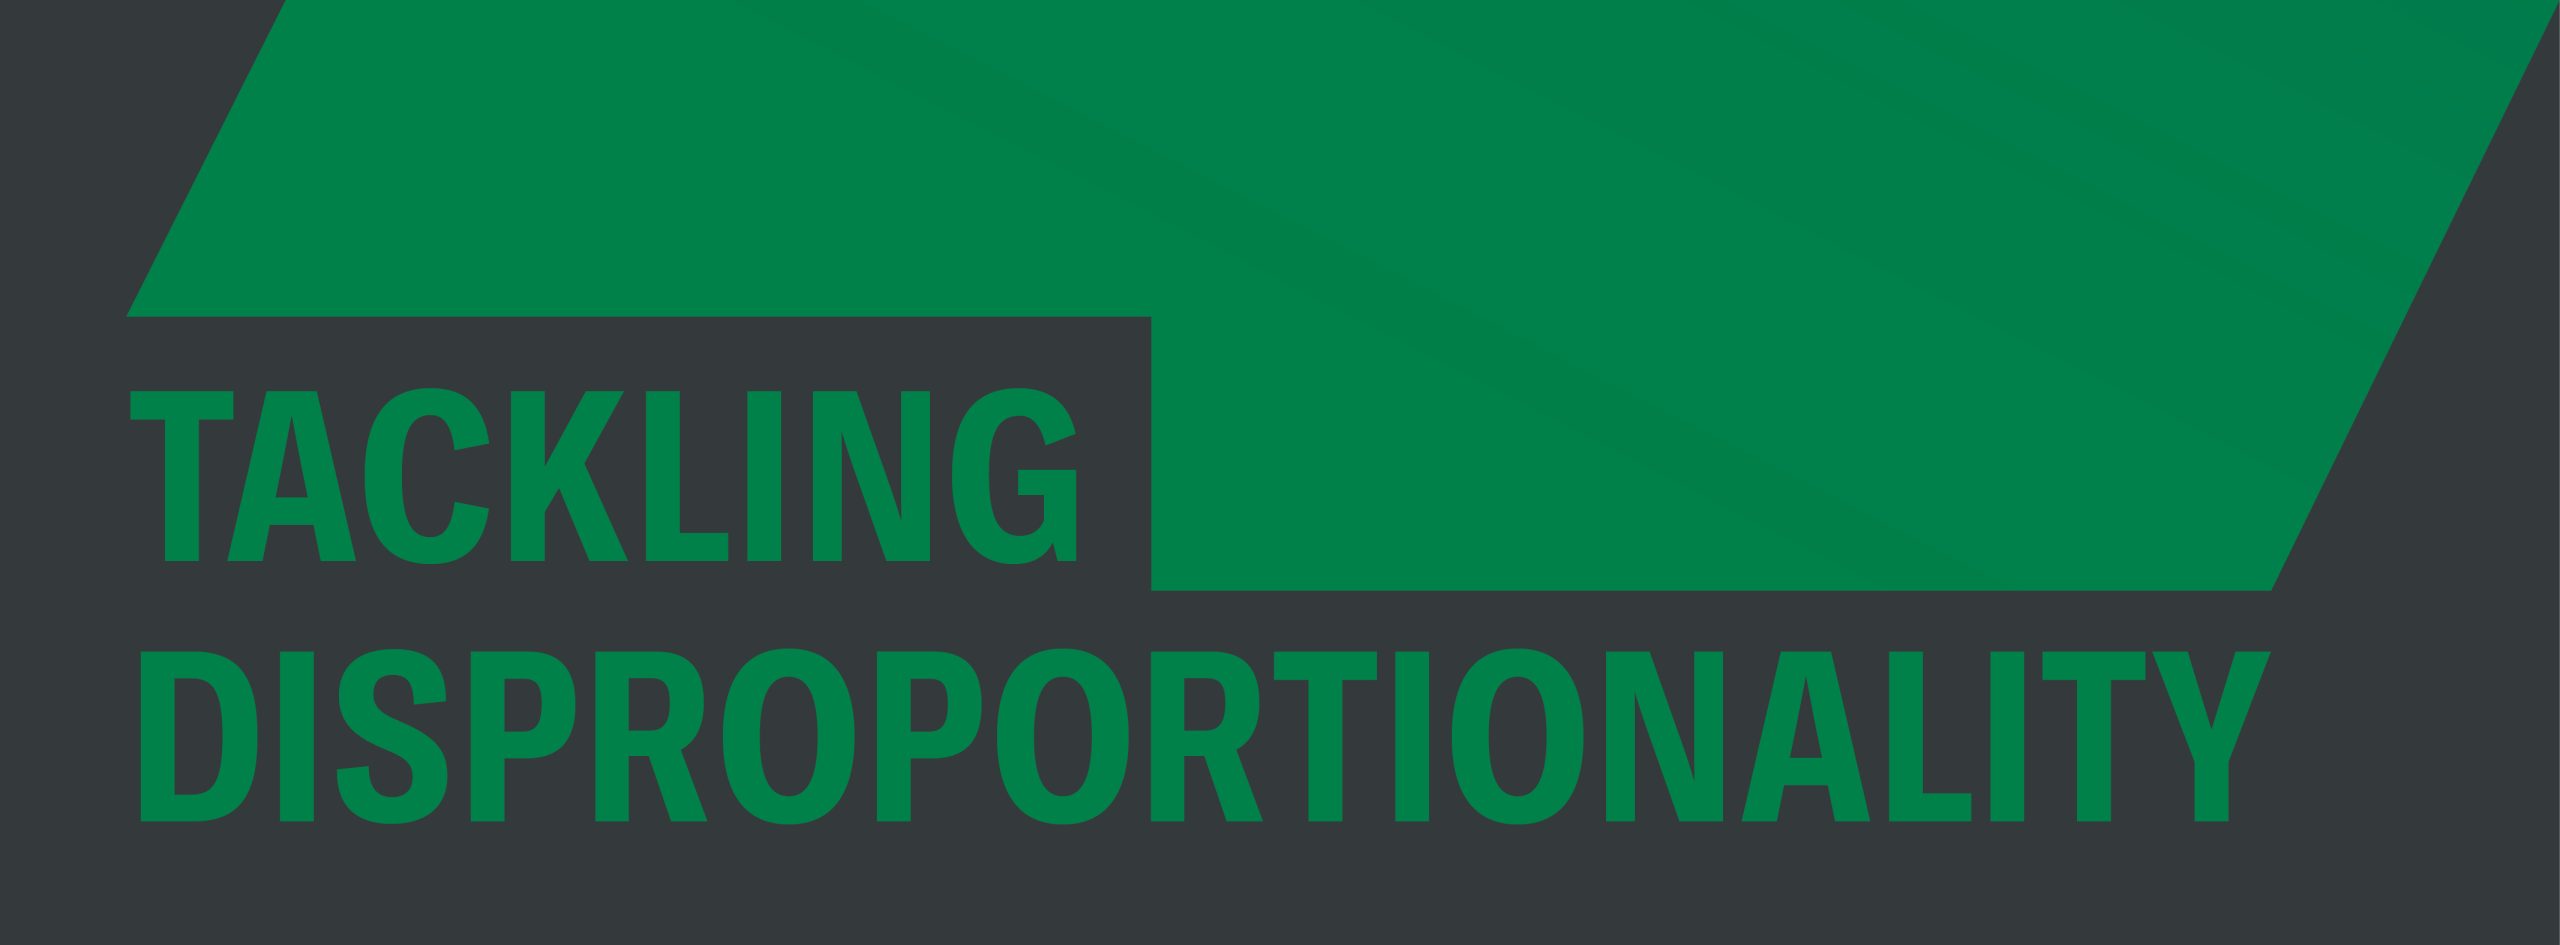 Green words on a black background. The words say "tackling disproportionality" in capital letters.